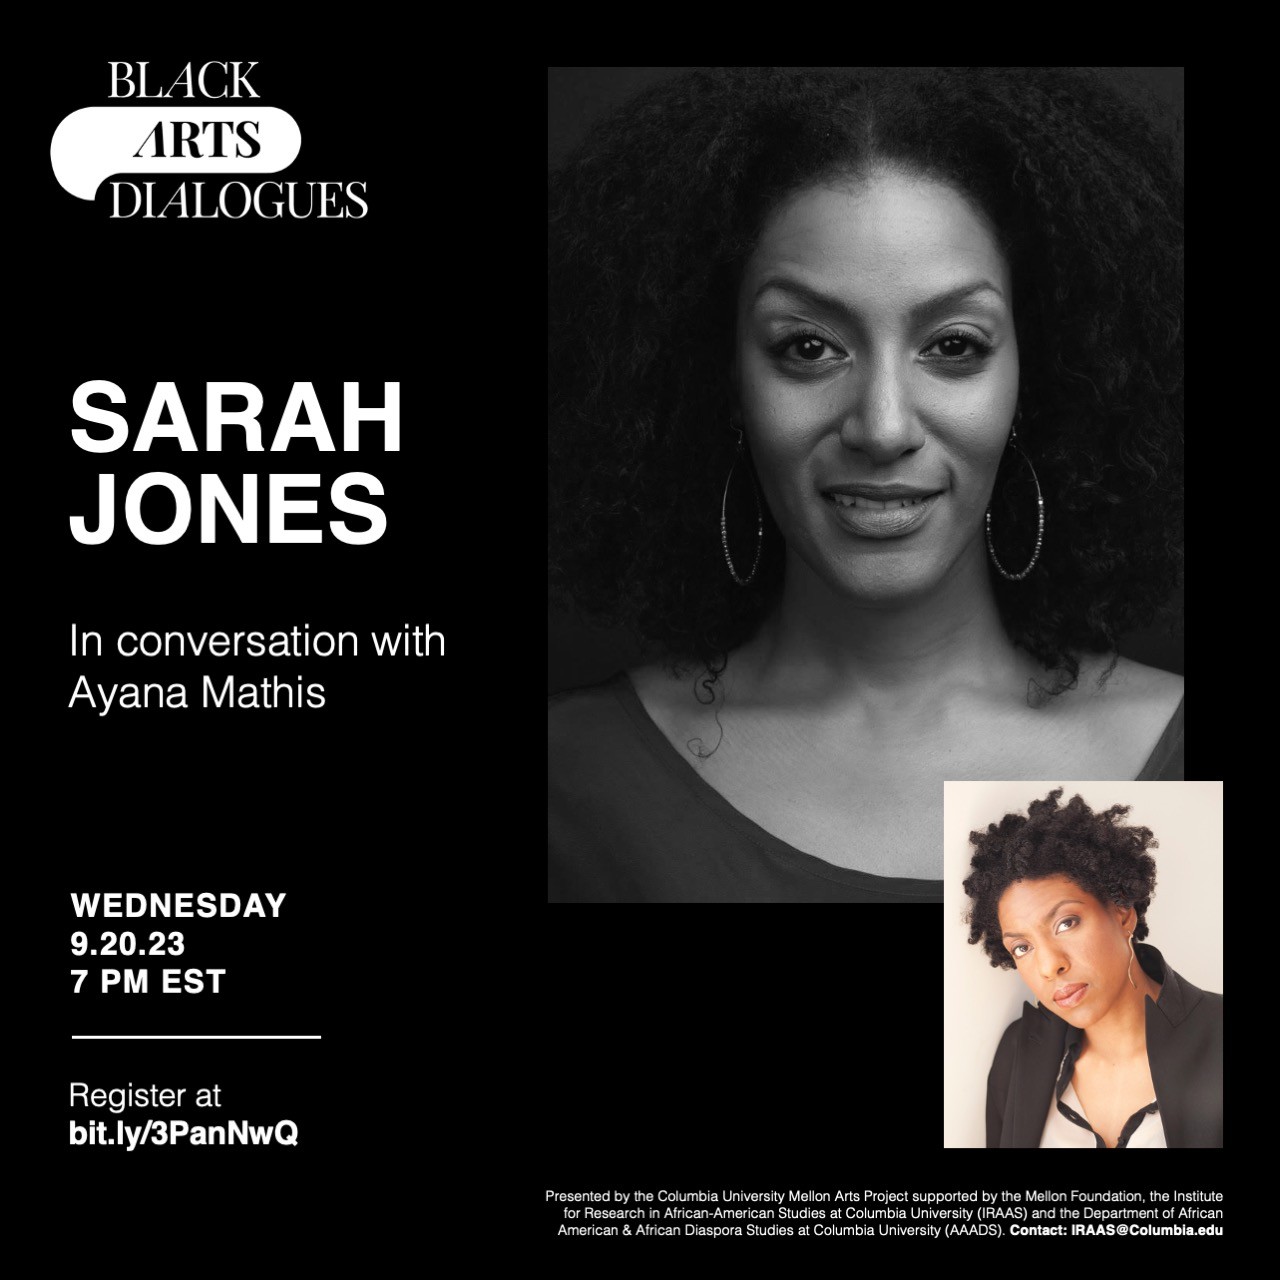 Image of event poster with Sarah Jones in conversation with Ayana Mathis